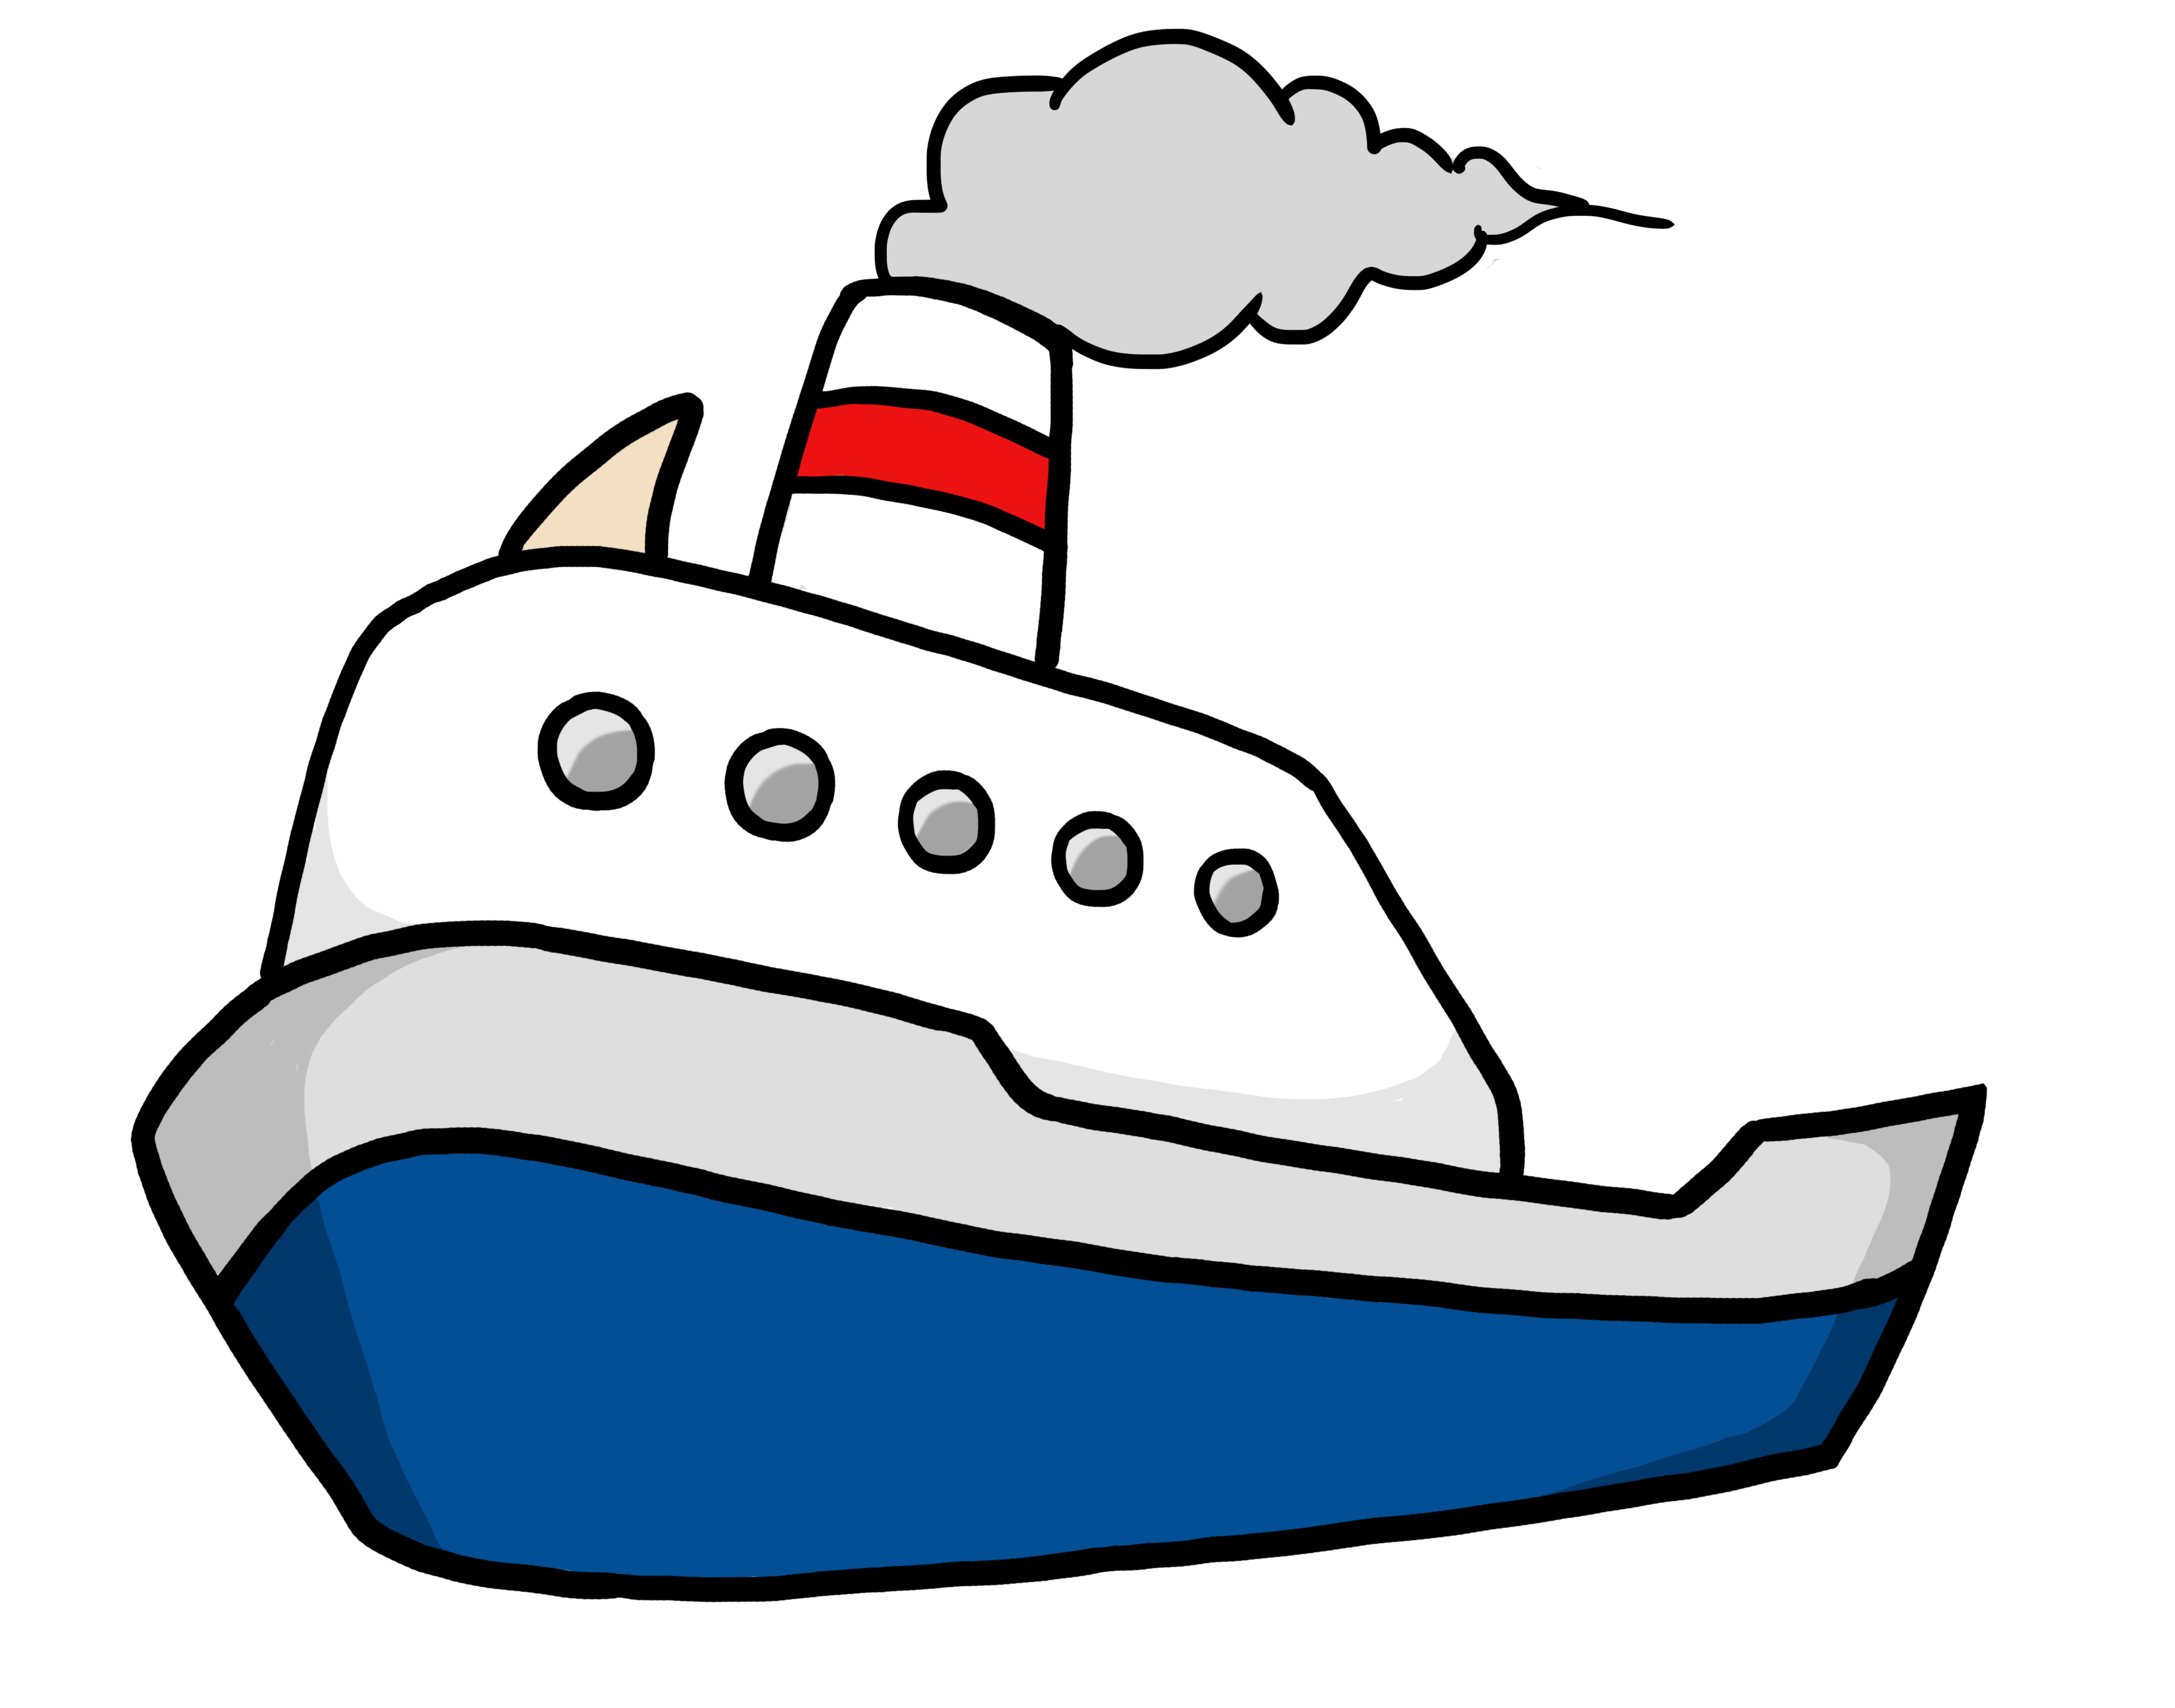 Boat free to use clipart